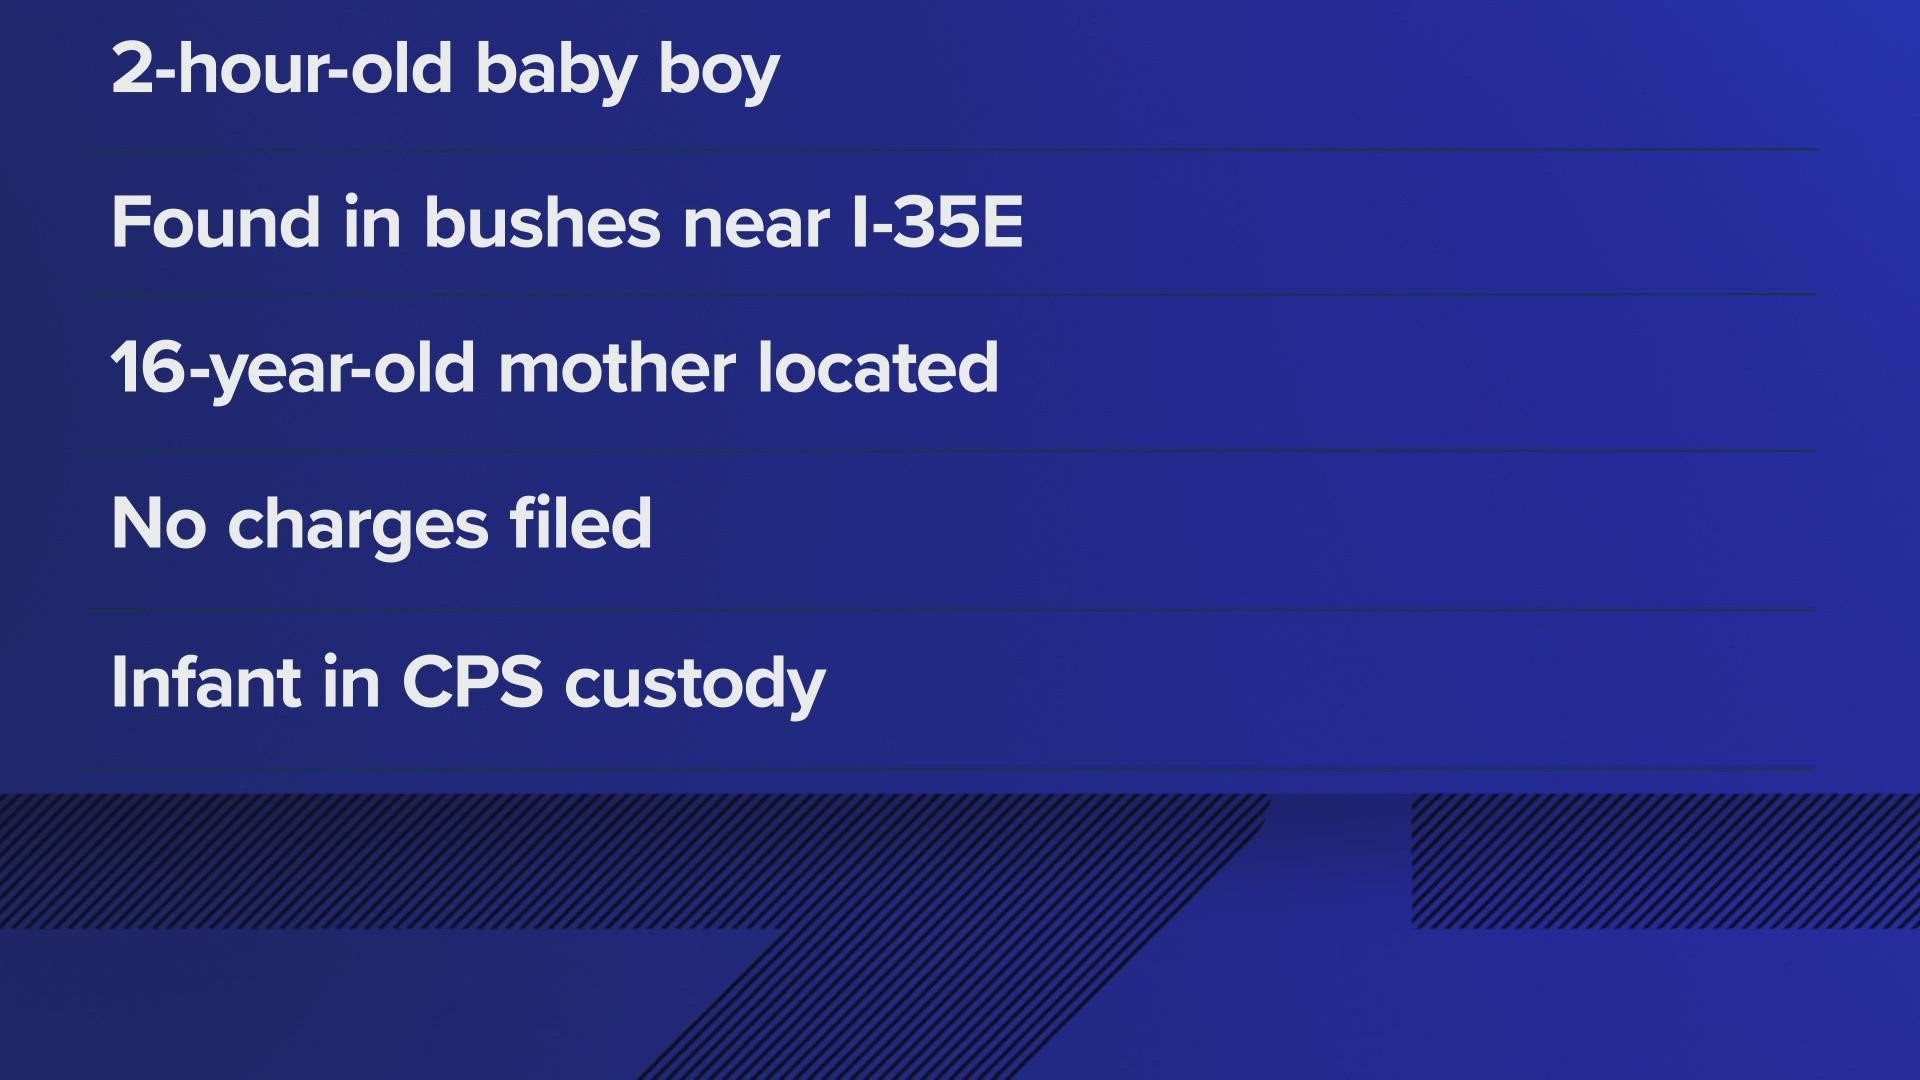 Police said the child was taken to an area hospital where he remains in good condition.